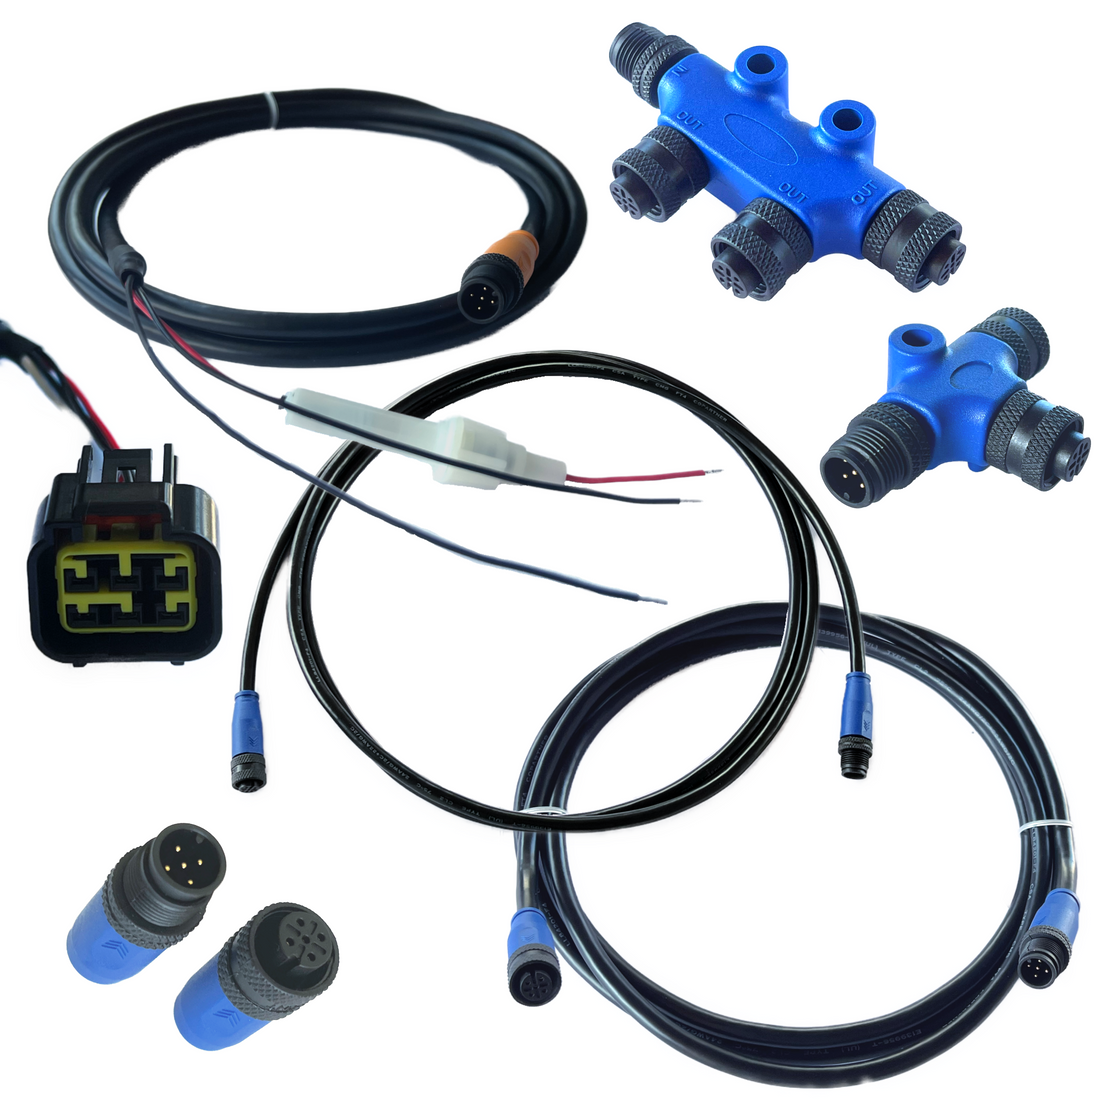 NMEA 2000 Starter Kit Set + Engine Cable for Honda Outboards